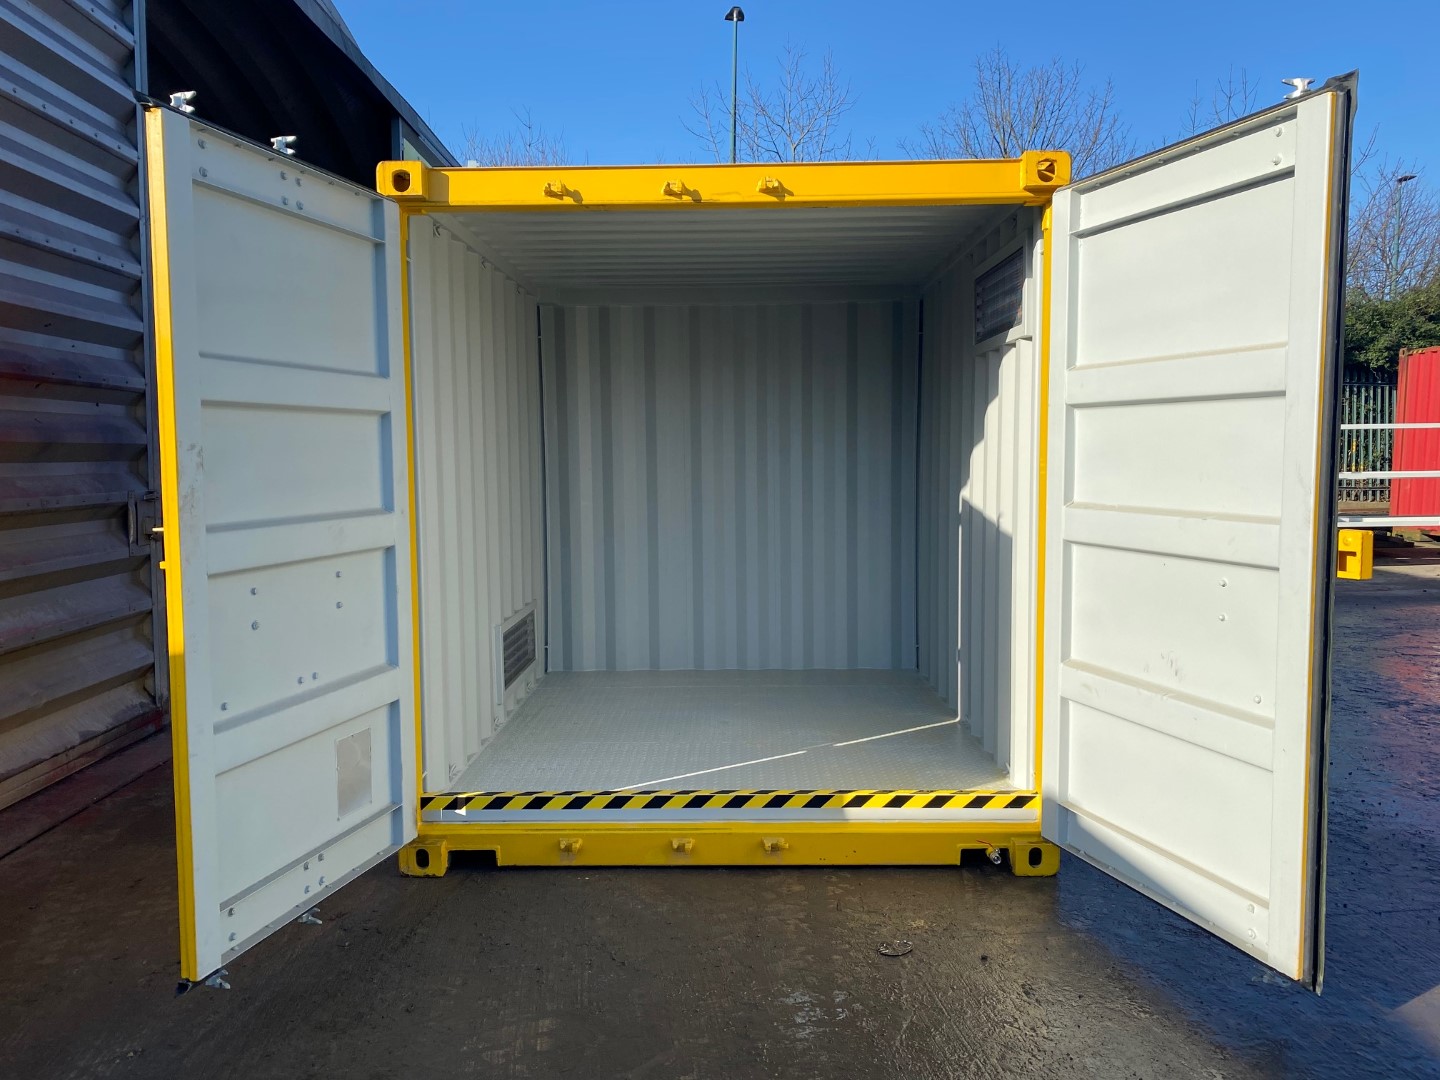 Providers of Bunded Chemical Storage Containers